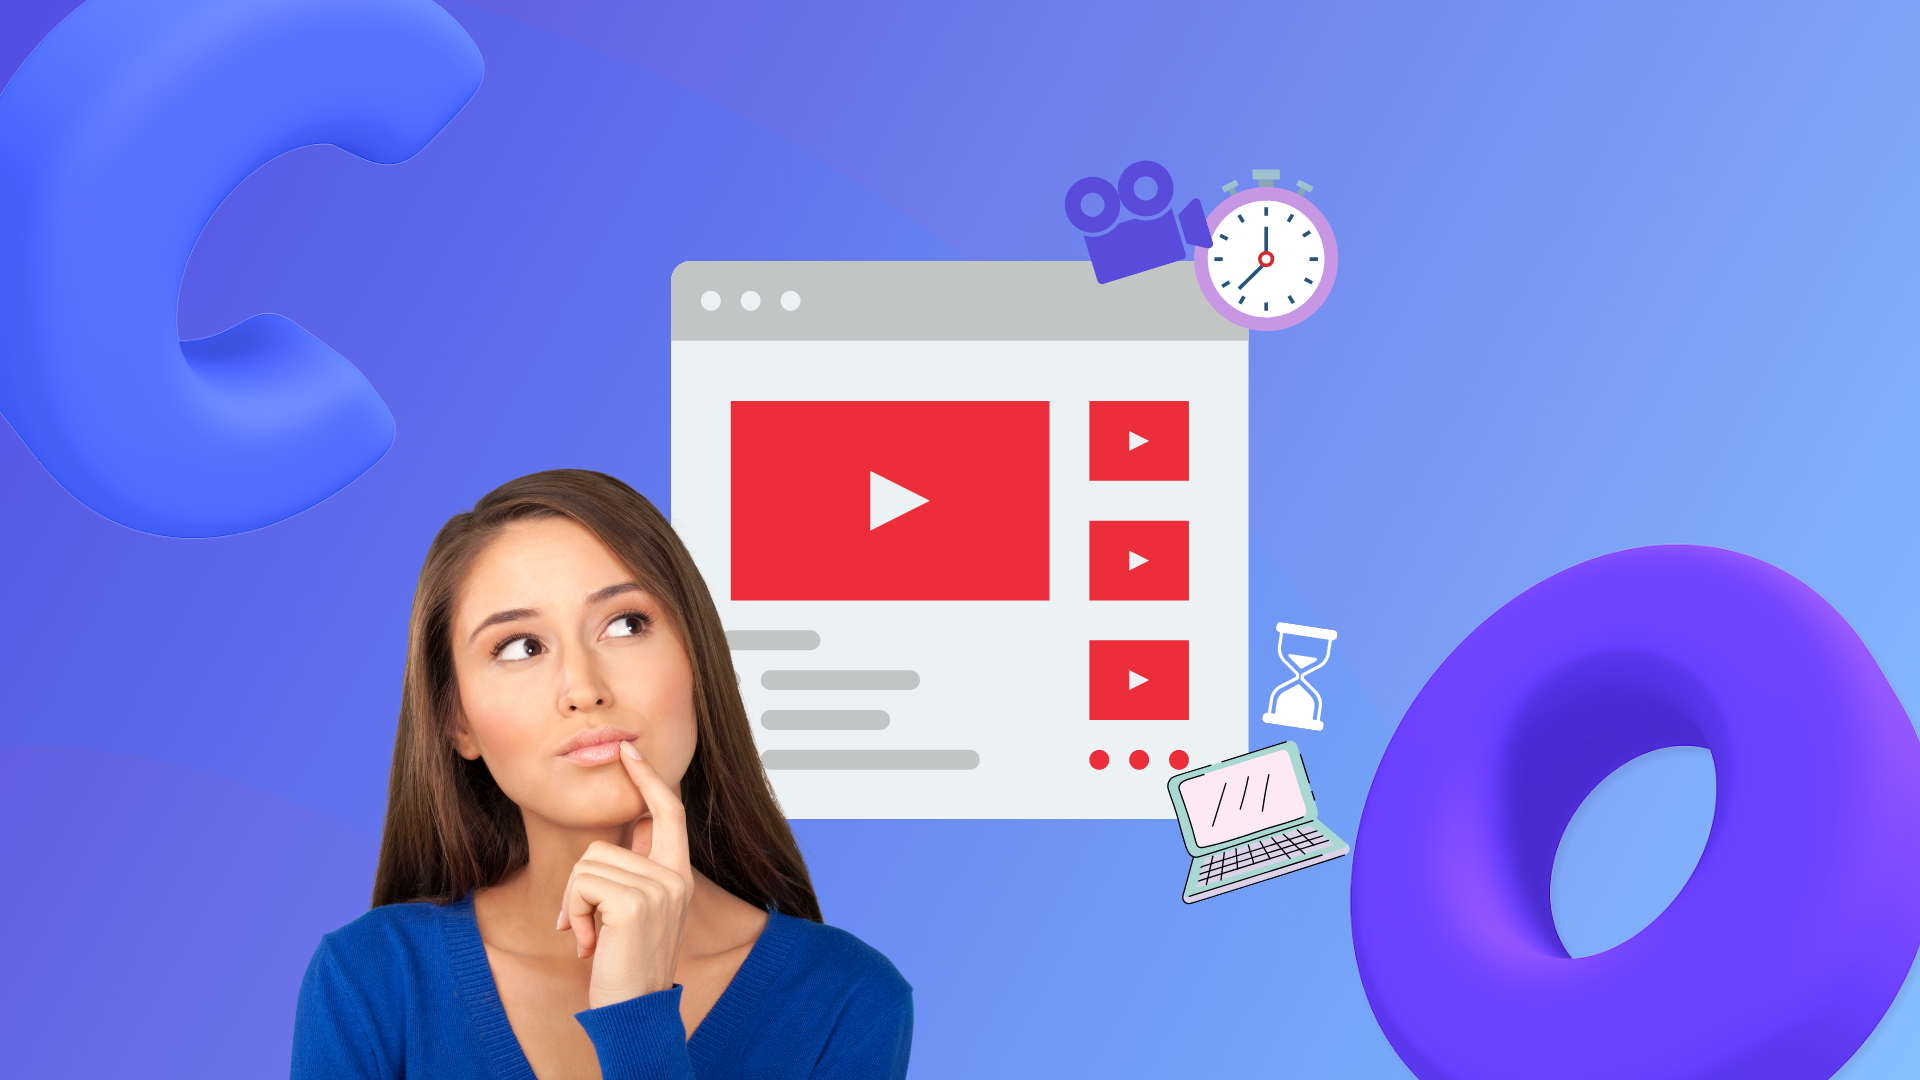 10 Ideas to increase YouTube watch time for new channels | Clipchamp Blog